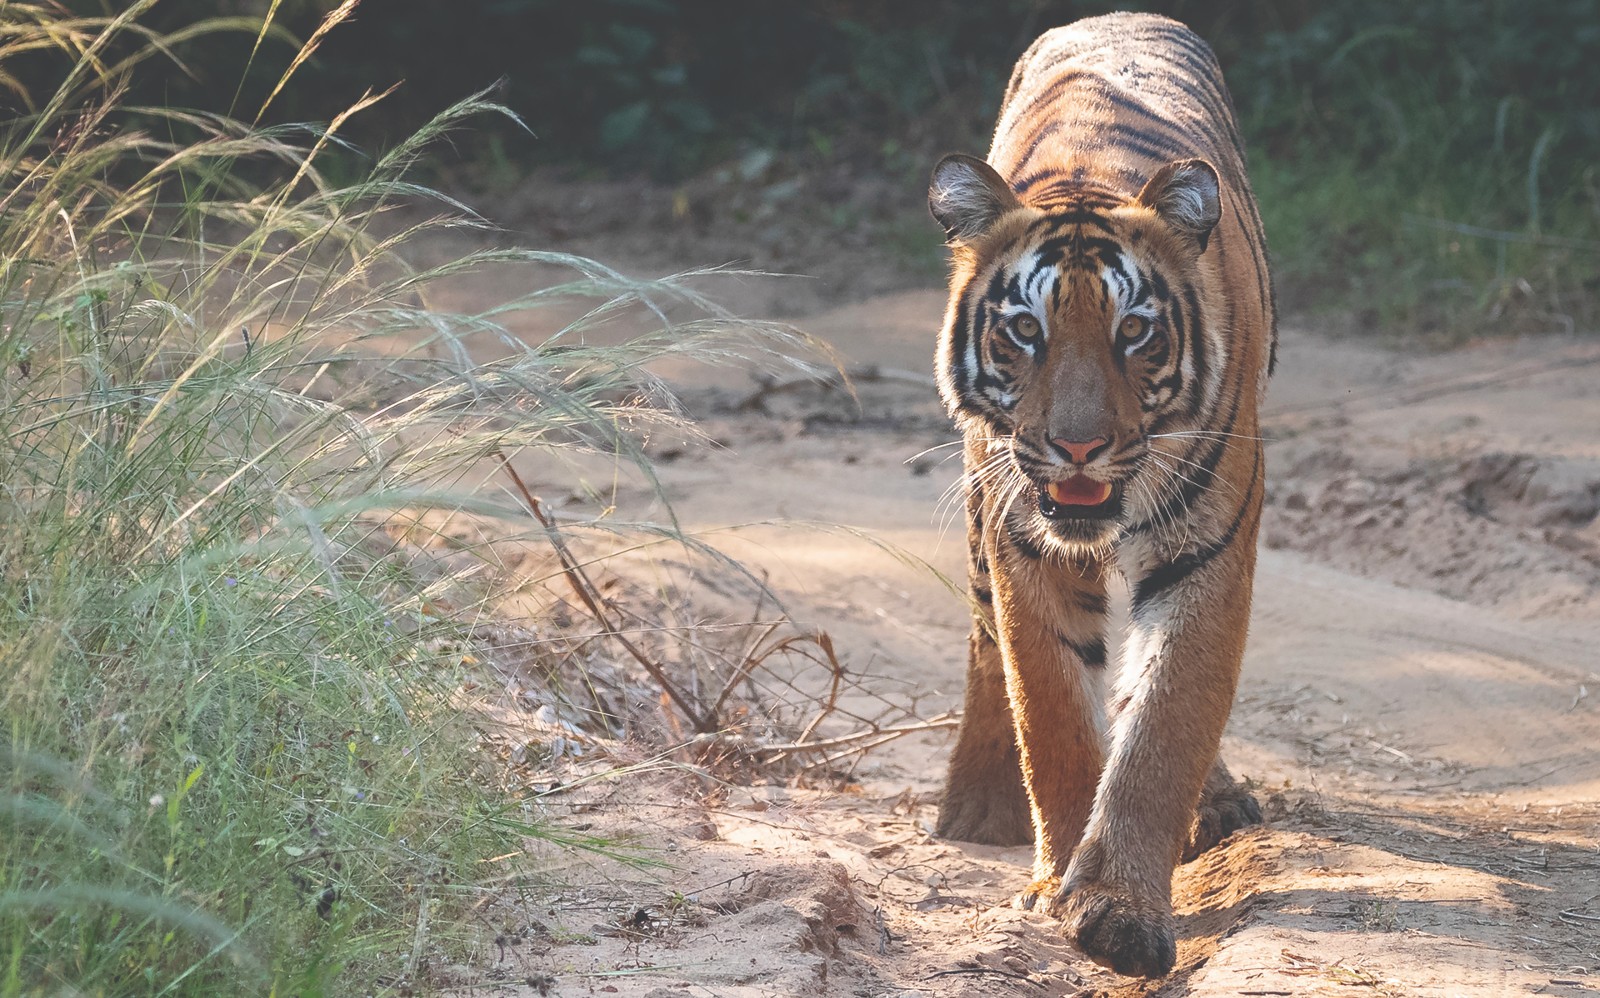 A wild tiger walking on a dusty track through the forest